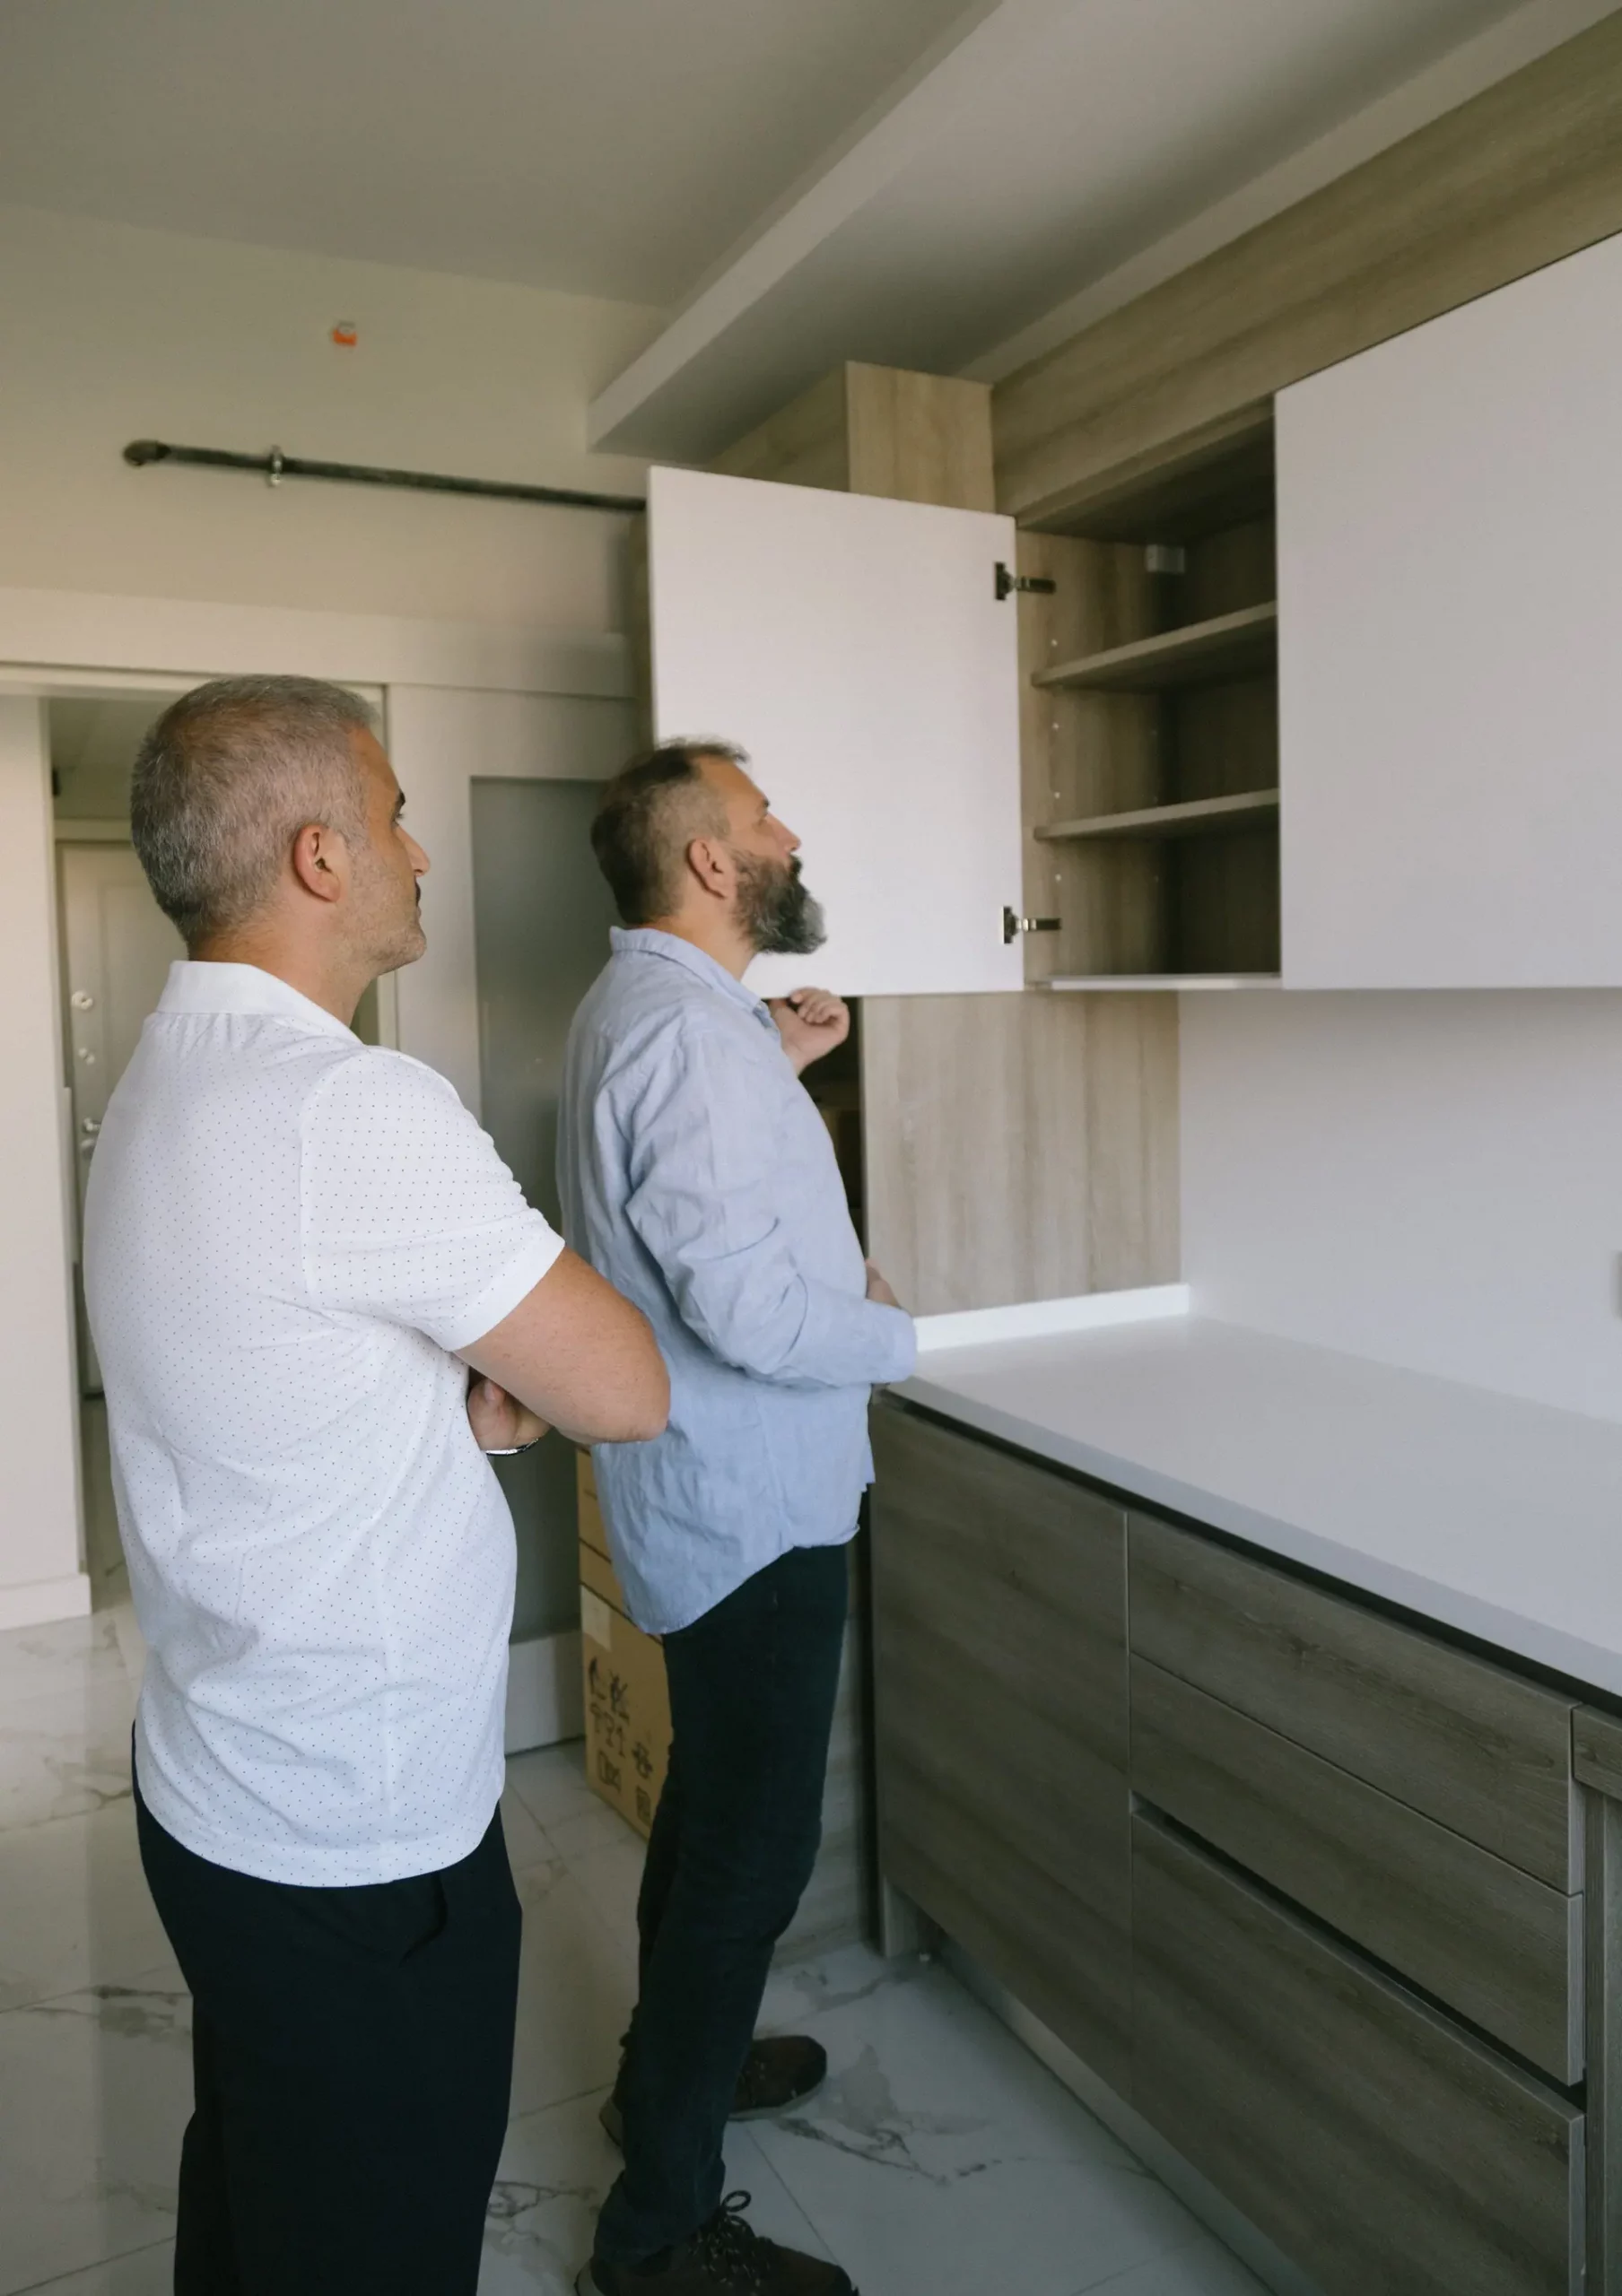 Home inspection: 2 men are inspecting a kitchen